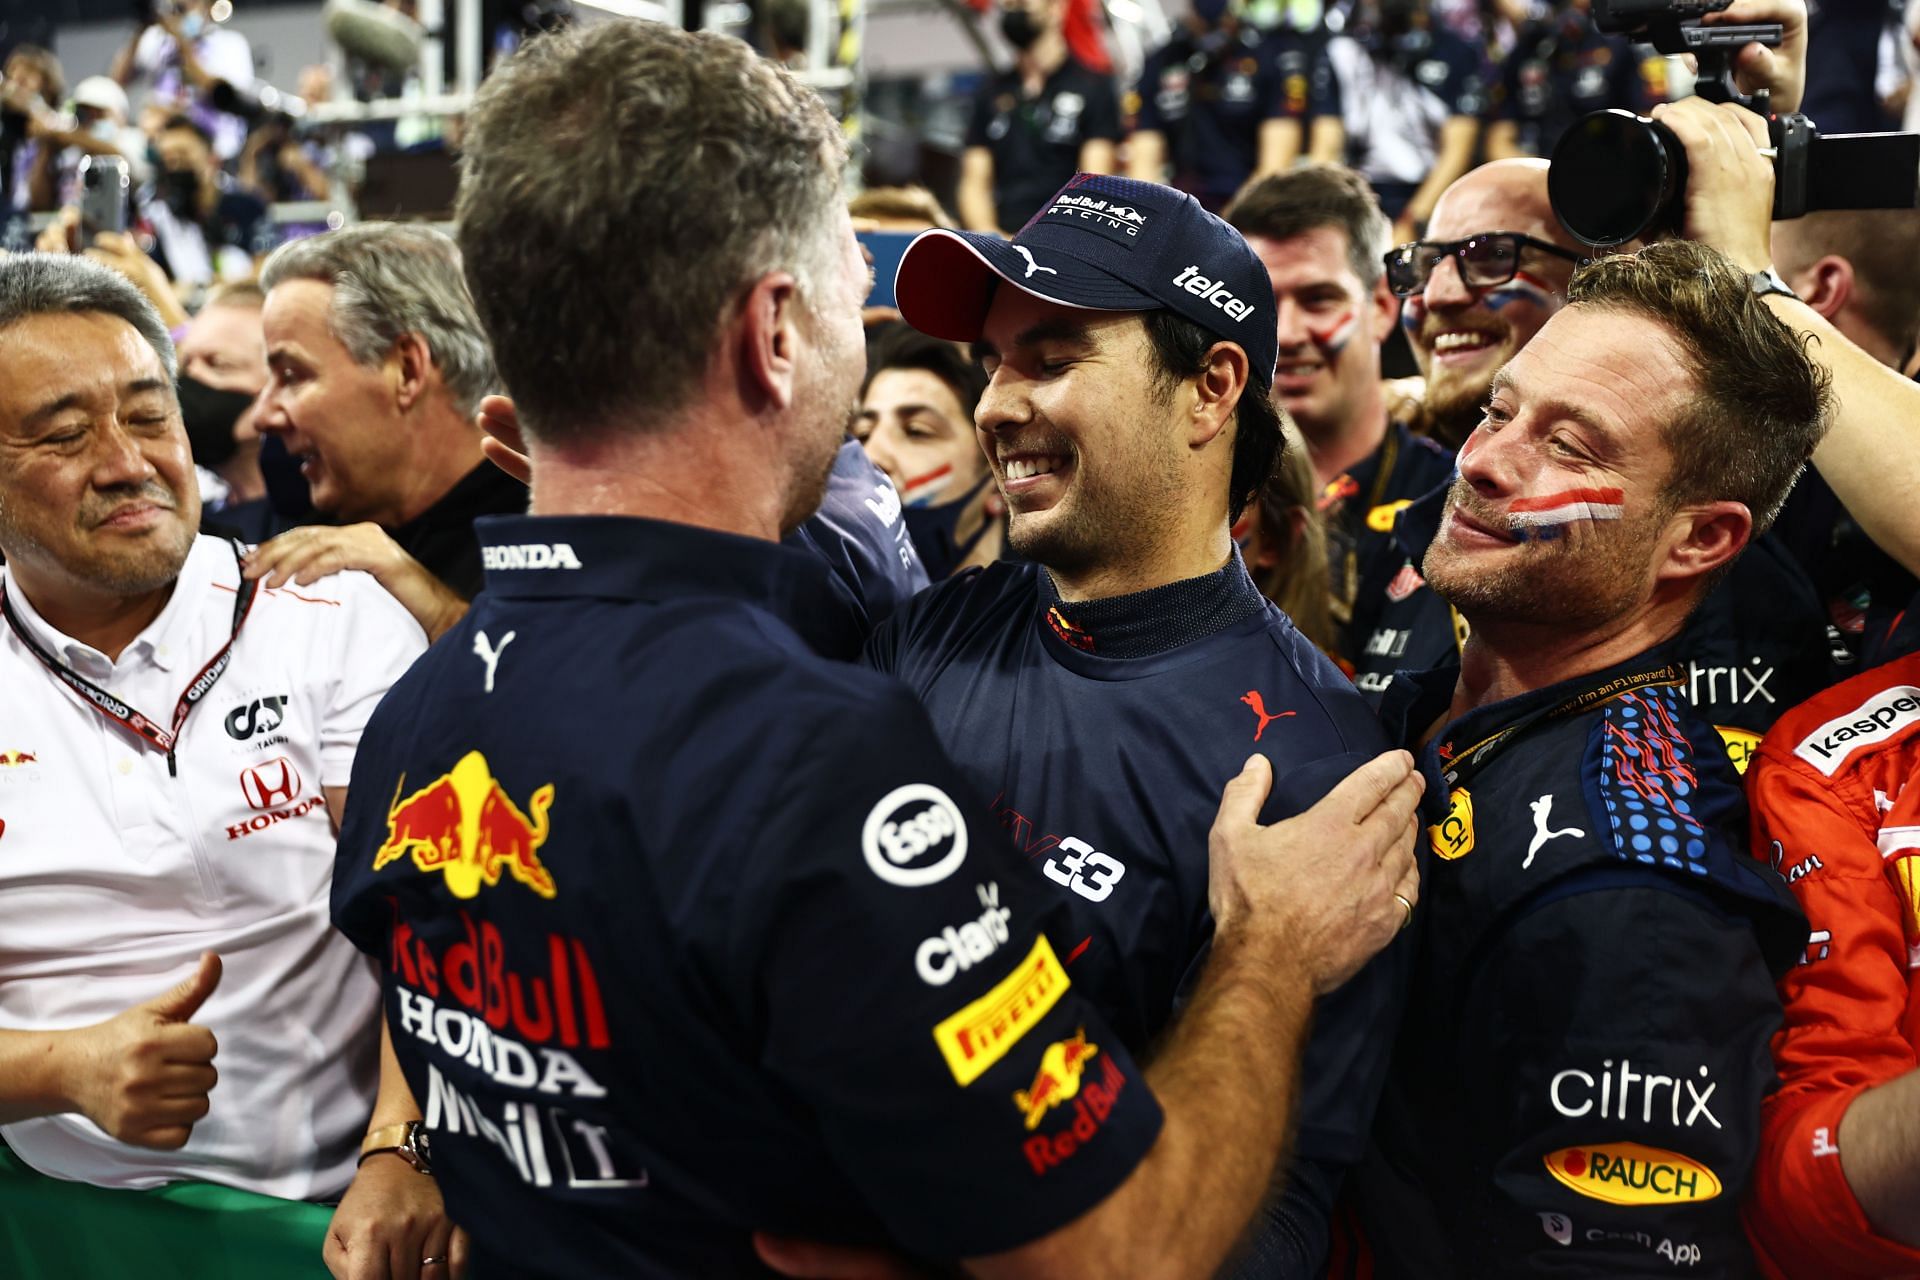 Red Bull boss Christian Horner (left of center) and Sergio Perez (right of center) at the F1 Grand Prix of Abu Dhabi